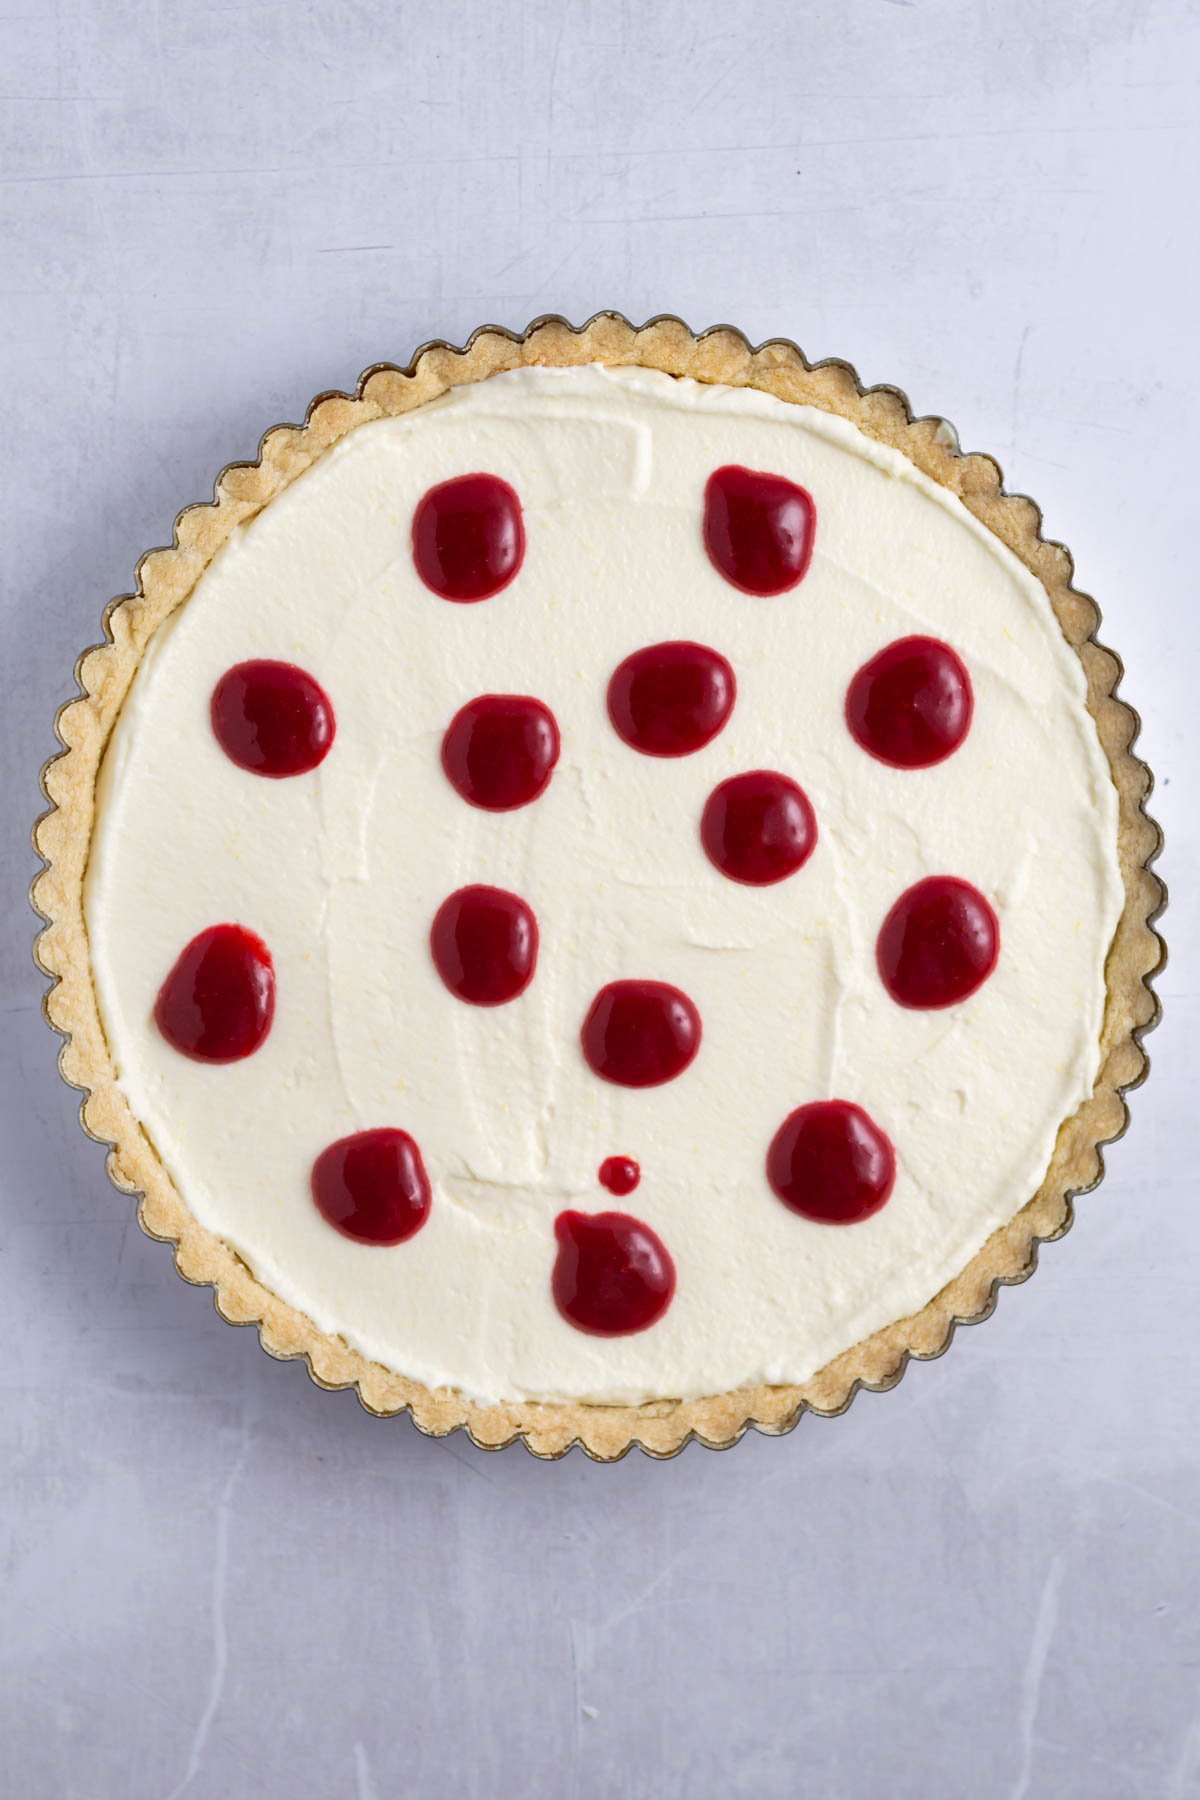 raspberry coulis dropped in circles over lemon filling